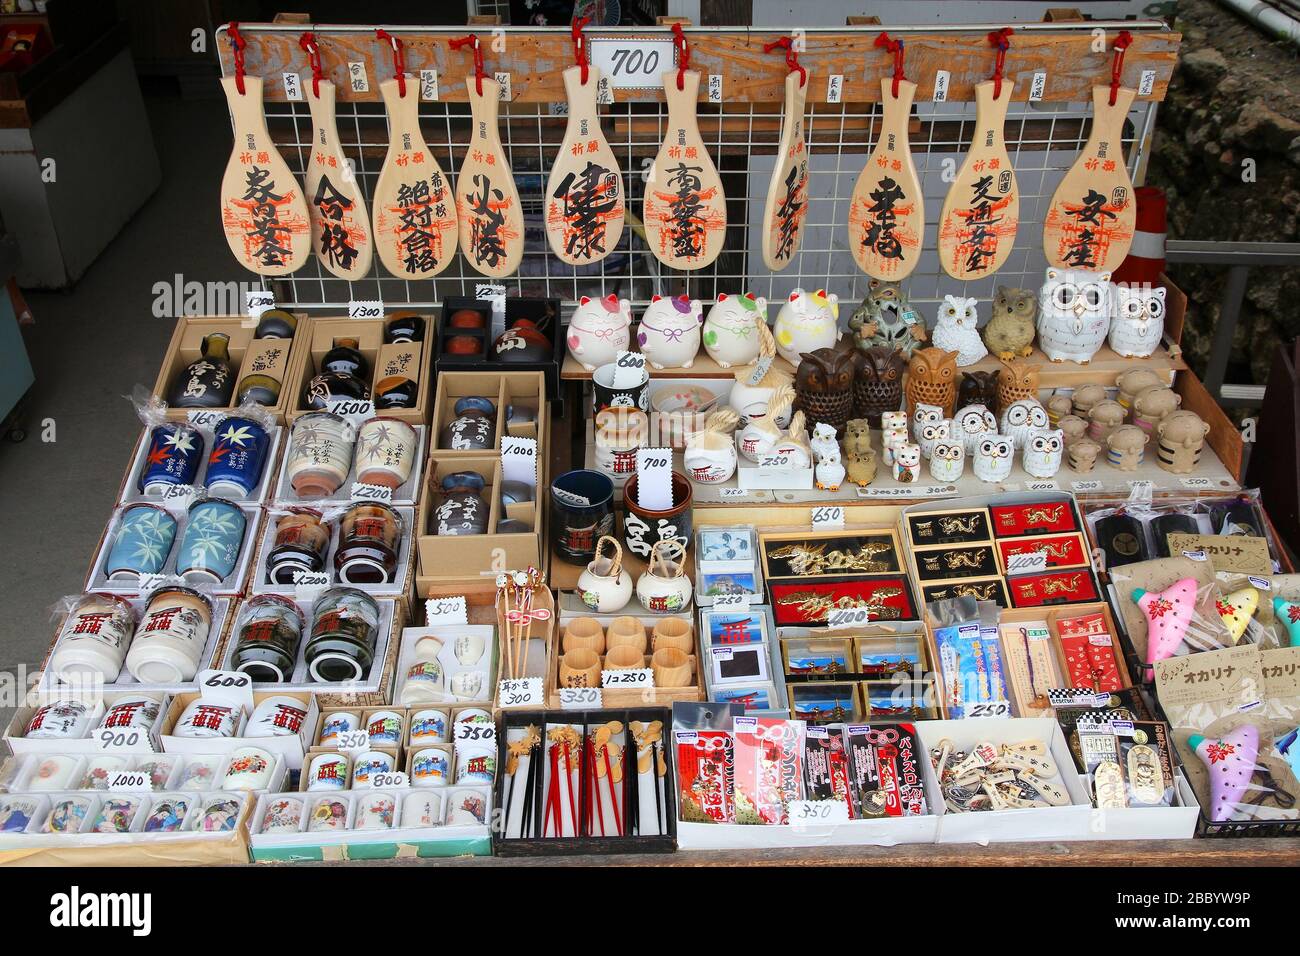 MIYAJIMA, JAPAN - APRIL 21, 2012: Souvenirs in a gift shop at Itsukushima Island in Japan. The island is a UNESCO World Heritage Site and is a popular Stock Photo